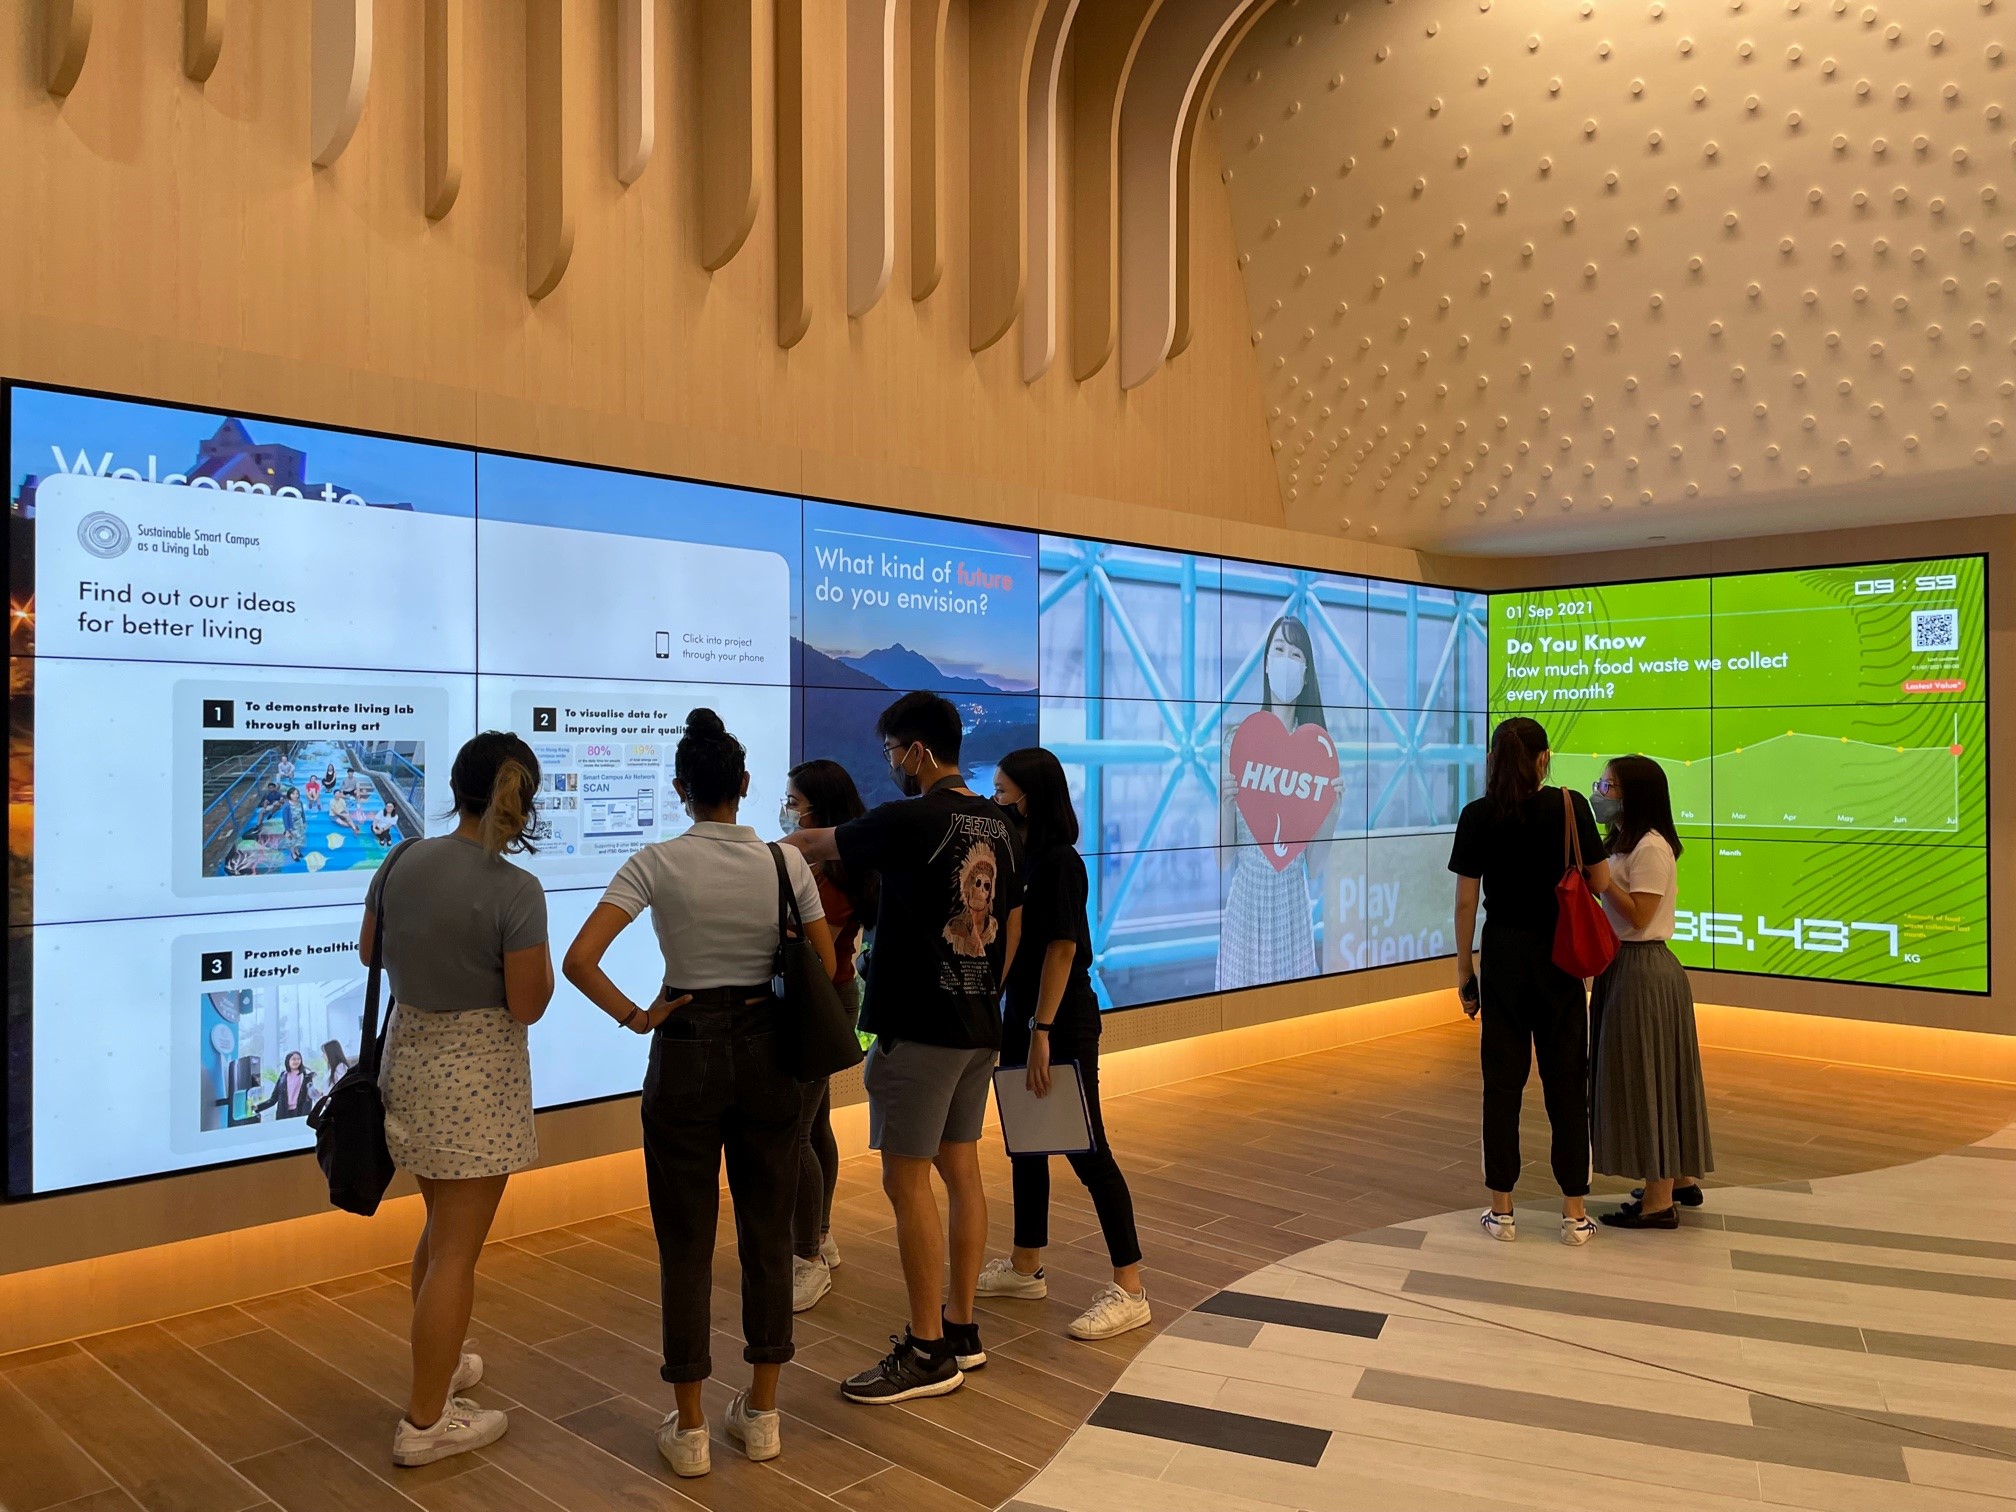 The interactive screen in the SSC Hub established by HKUST allows university members to know more about the real-time data and outcome generated by different SSC projects and other University sustainability initiatives